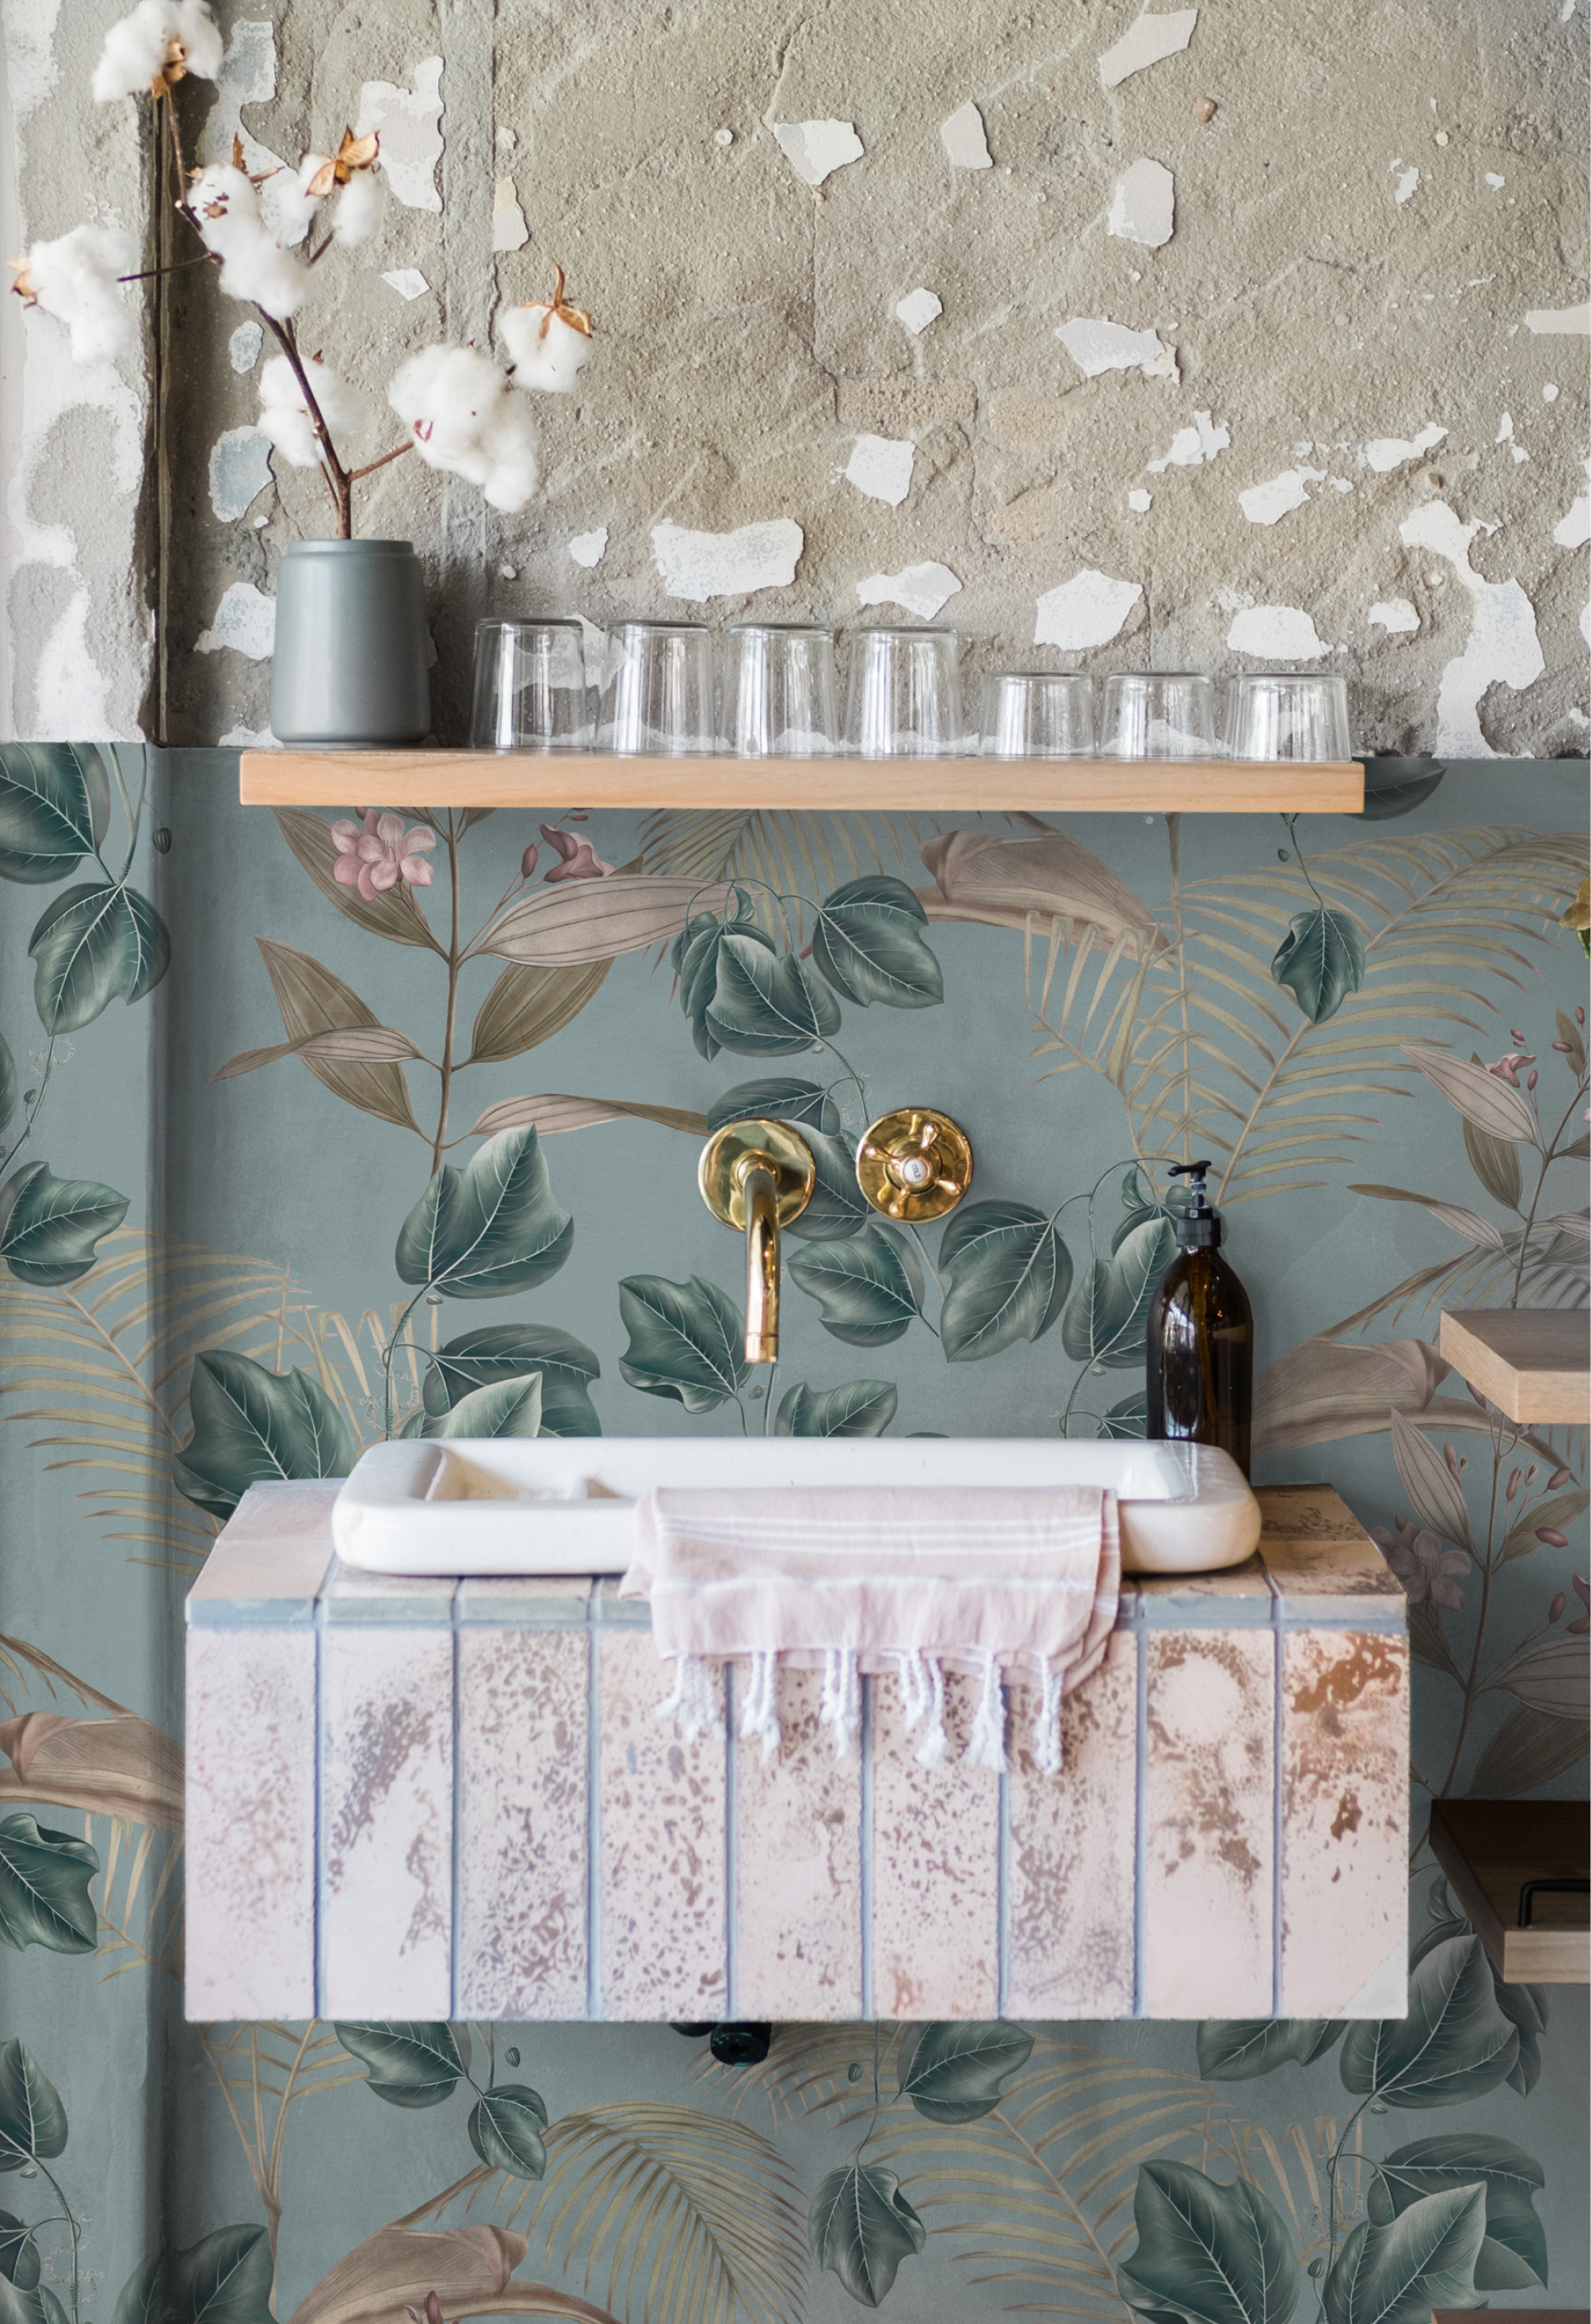 Modern room with sink surrounded by tropical palm design with leaves and a monkey on blue background by Deus ex Gardenia's Wild Ivy wallpaper in Horizon. Photo by Arno Smit Knynaa.